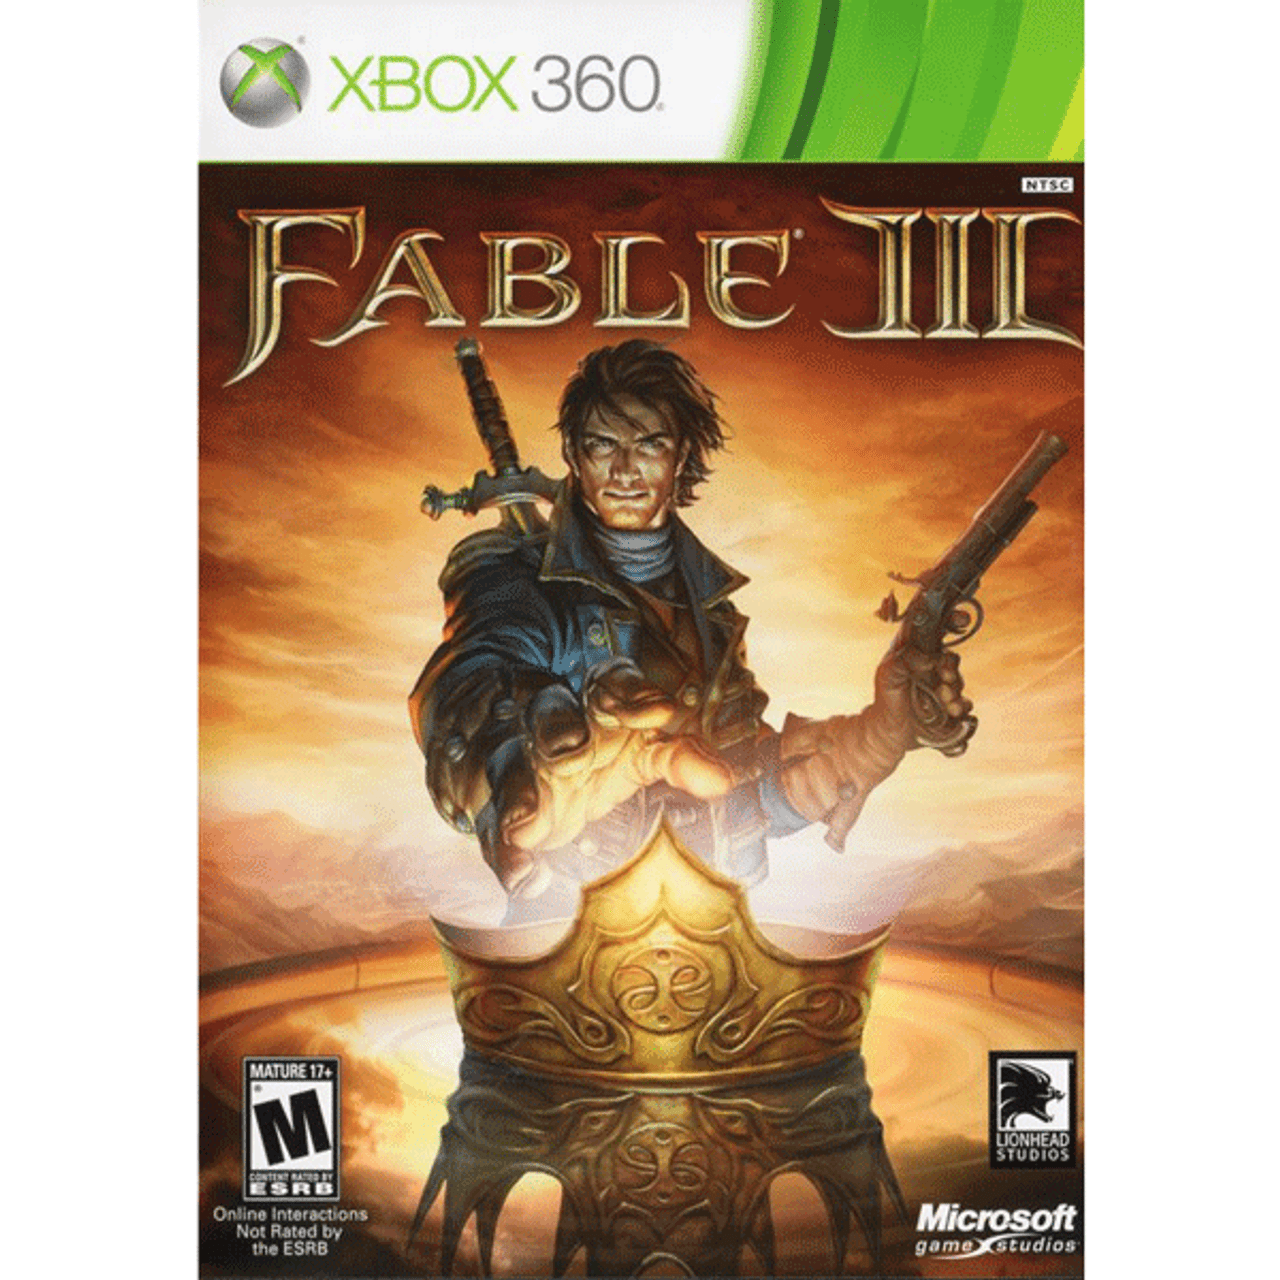 Fable II 2 Game of The Year Edition Xbox 360 Tested Working Manual TRACKED  for sale online